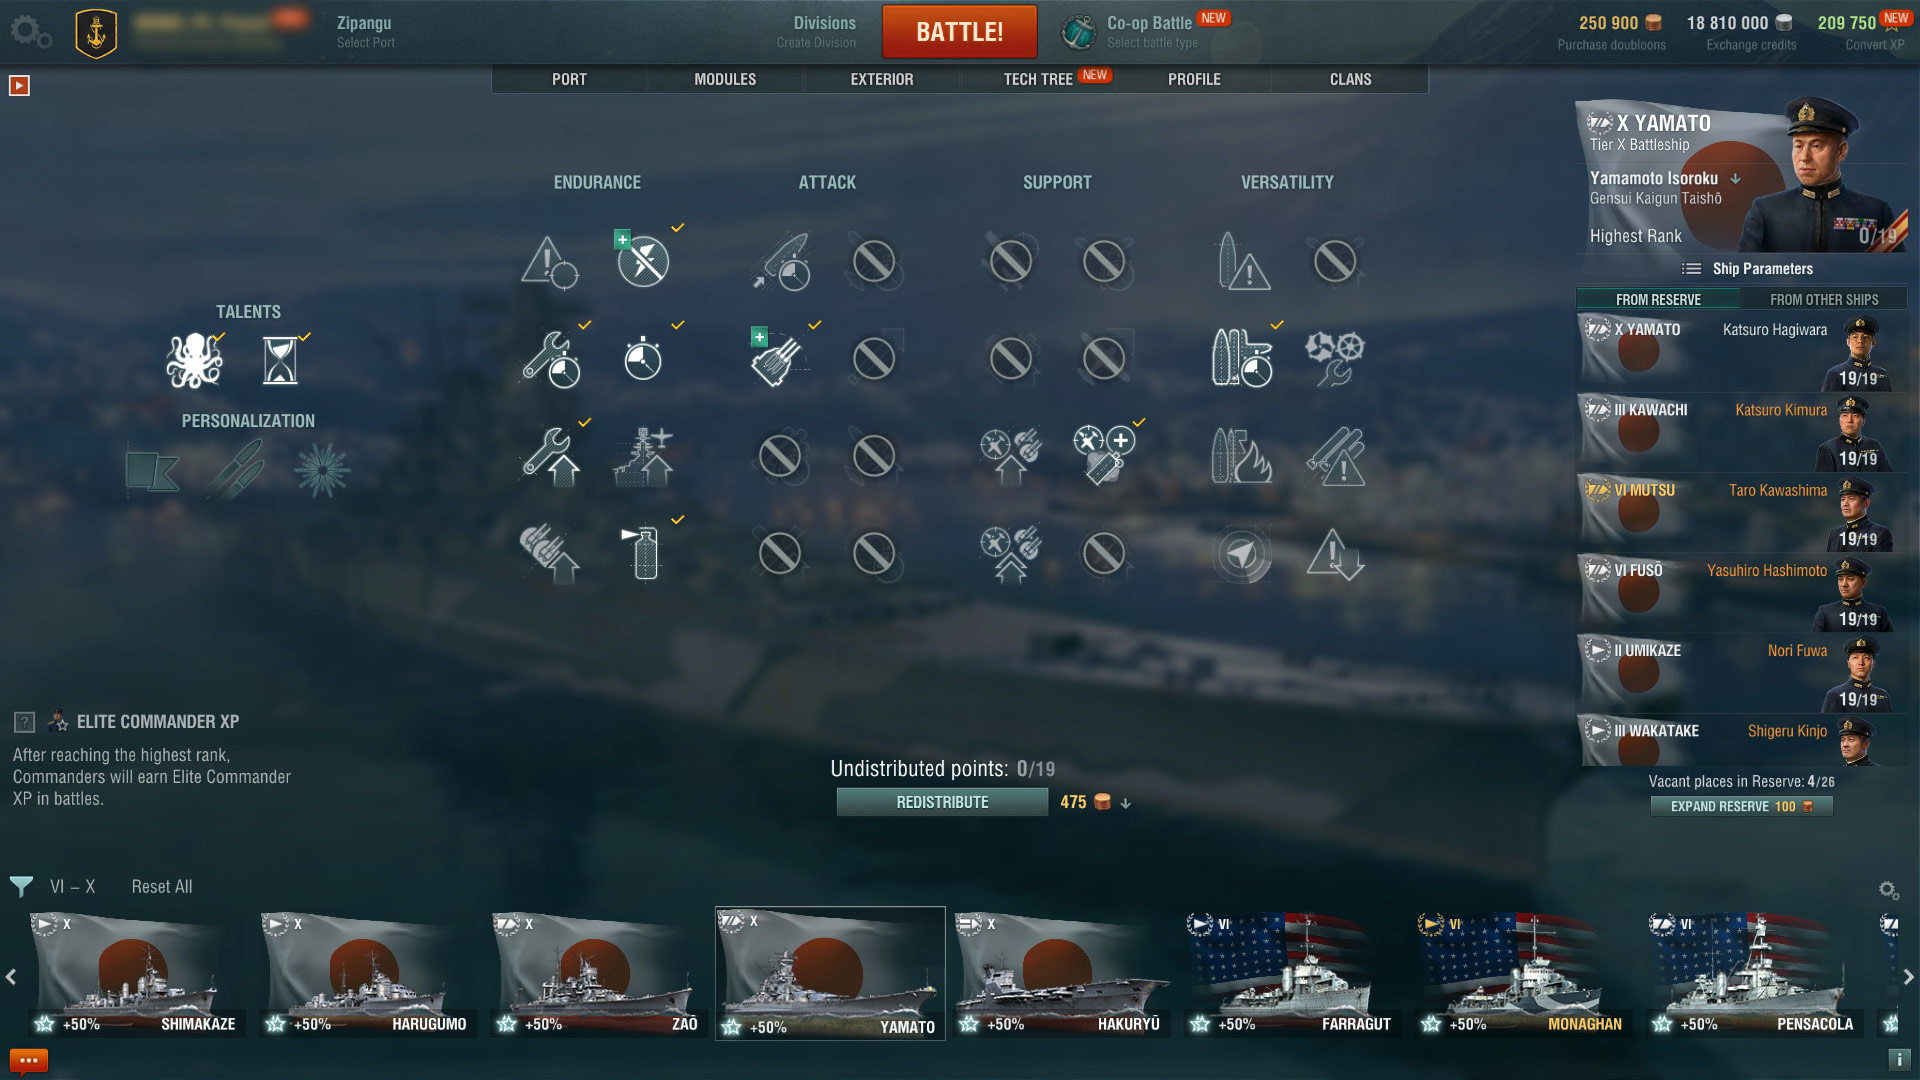 world of warships and steam store